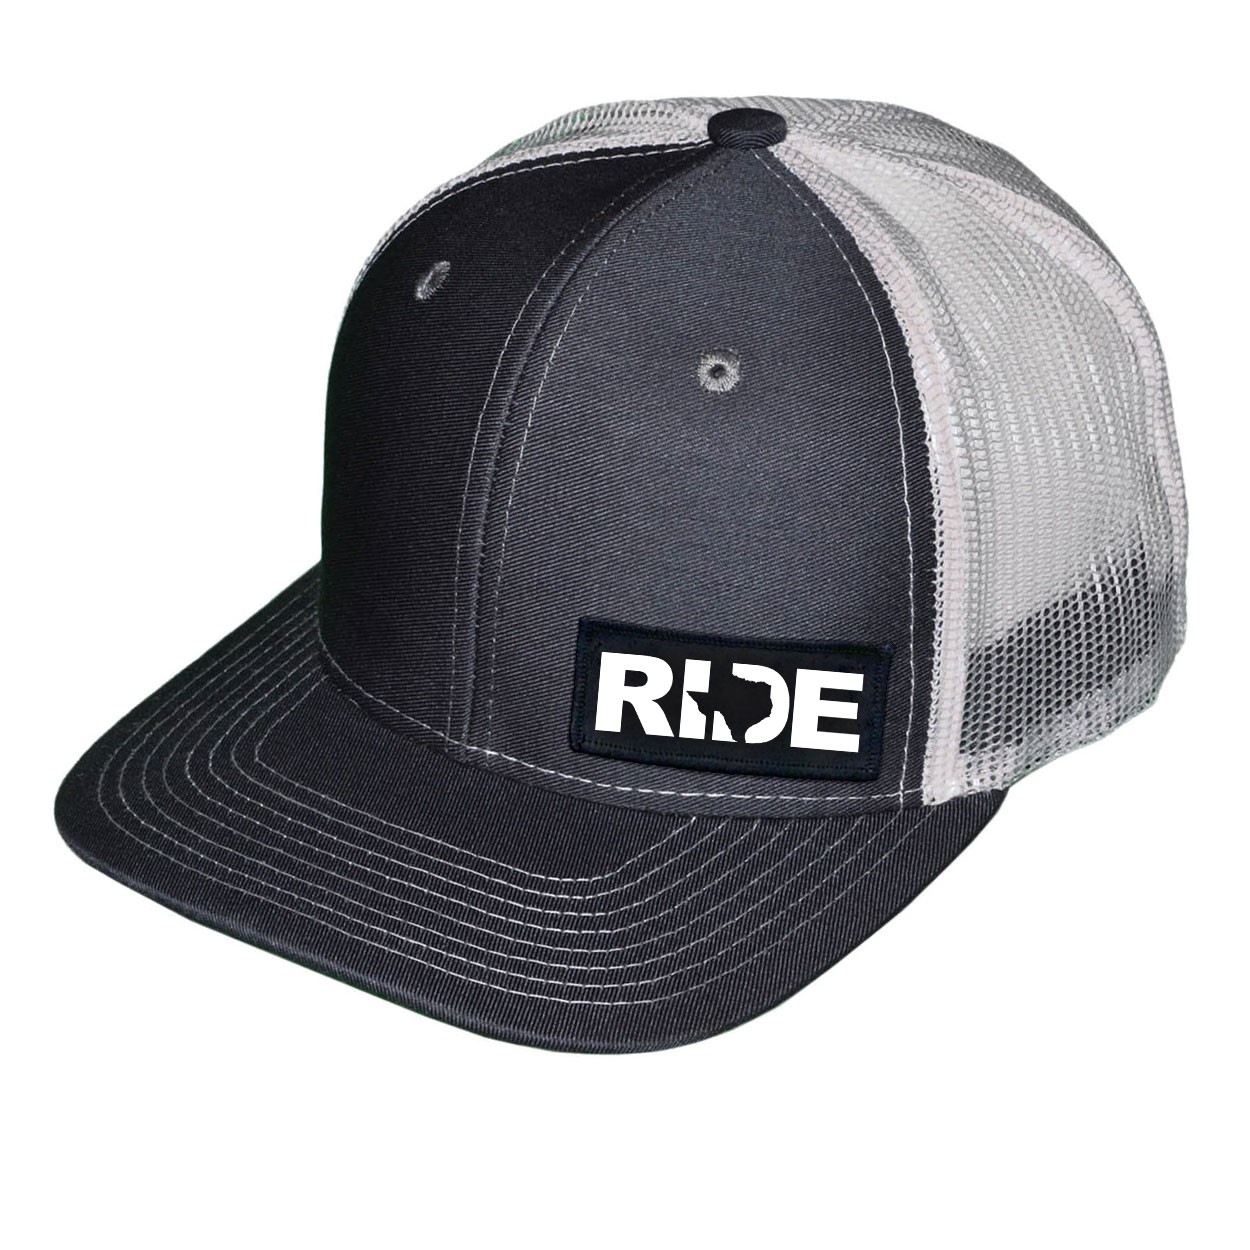 Ride Texas Night Out Woven Patch Snapback Trucker Hat Gray/White (White Logo)